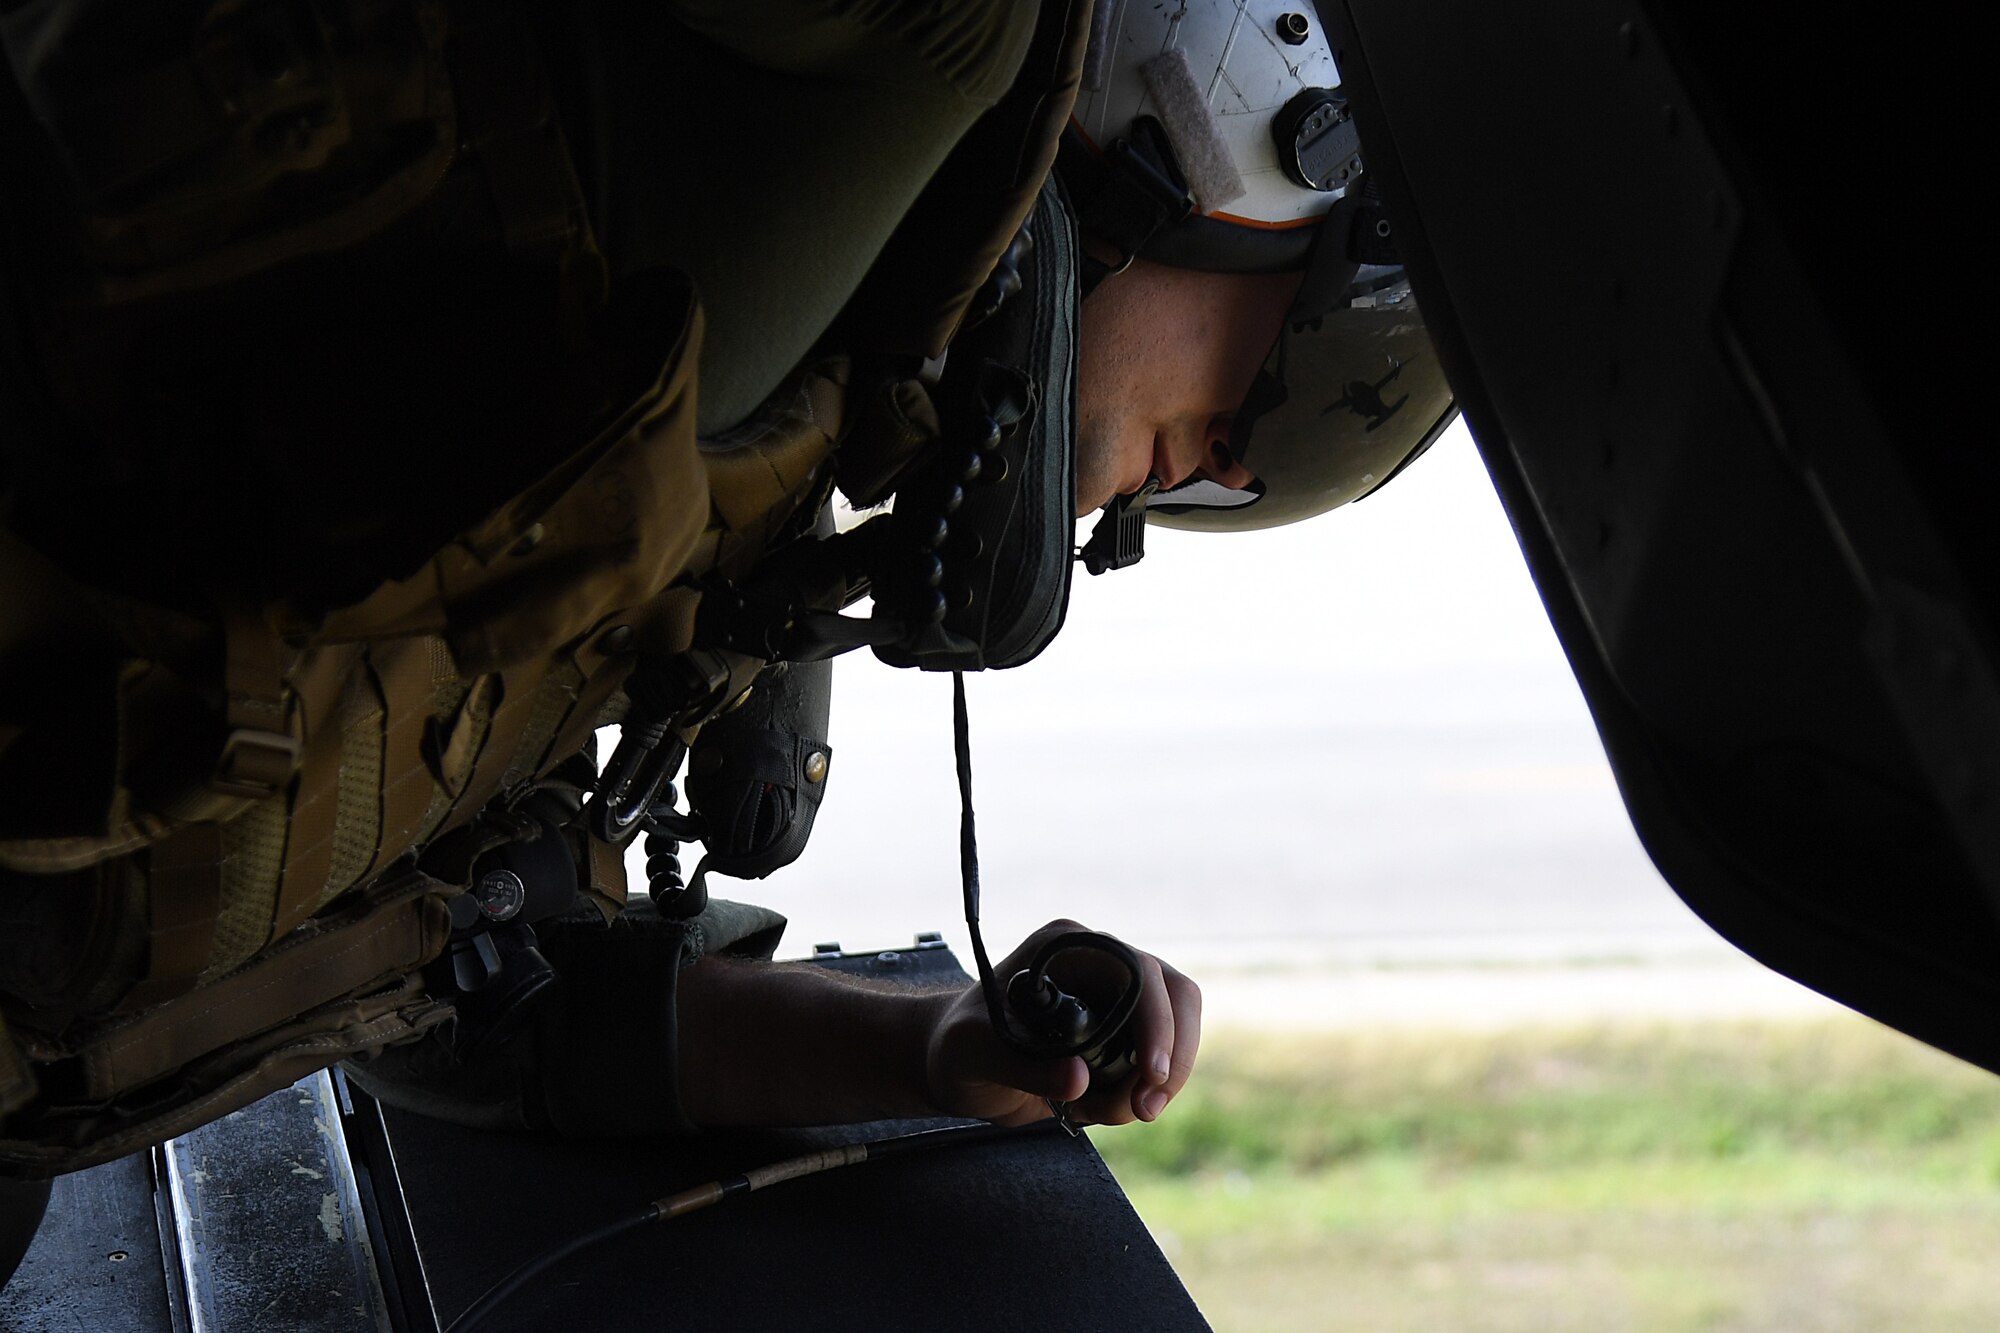 U.S. Marine Corps Staff Sgt. Jake Clark, Marine Medium Tiltrotor Squadron 774 MV-22B Osprey crew chief, Naval Air Station Norfolk, Virginia, watches the surroundings on the back of an MV-22B Osprey over Gulfport, Mississippi, Oct. 23, 2020. Marines came to Keesler to conduct routine training operations in and around the Mississippi area. (U.S. Air Force photo by Senior Airman Suzie Plotnikov)